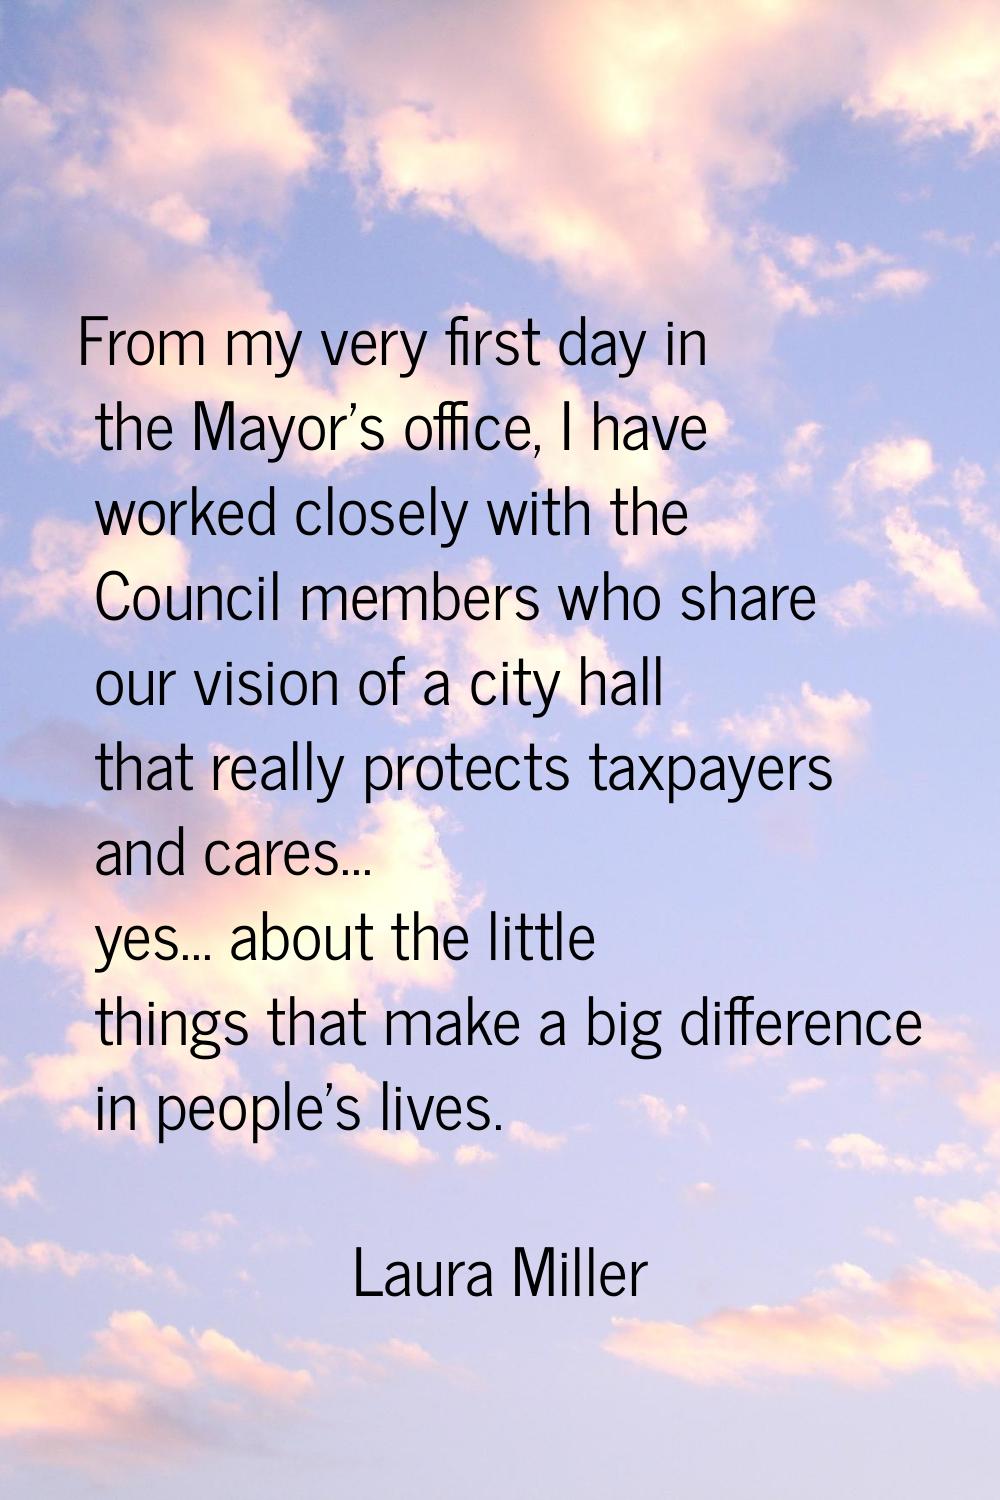 From my very first day in the Mayor's office, I have worked closely with the Council members who sh